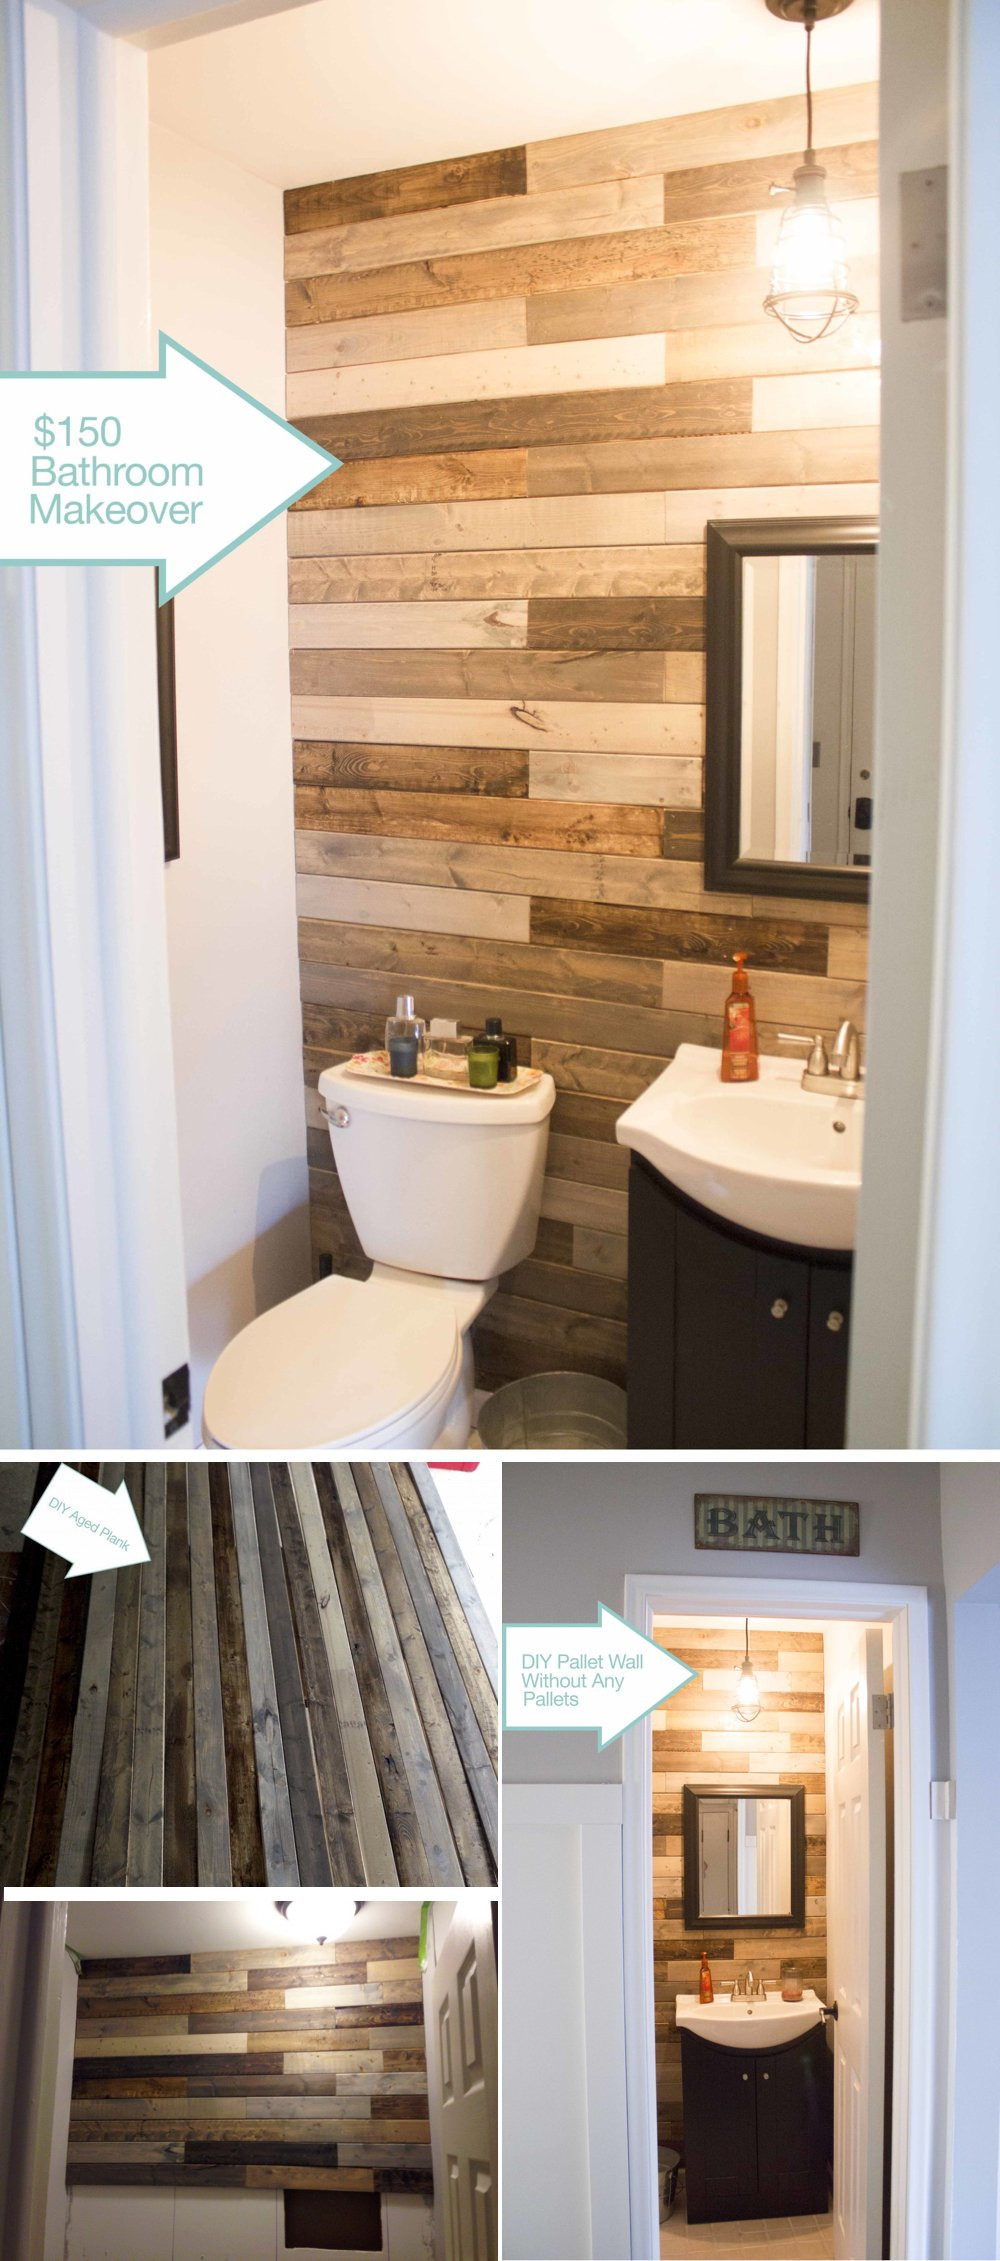 Bathroom Accent Wall Ideas
 15 Beautiful Wood Accent Wall Ideas to Upgrade Your Space